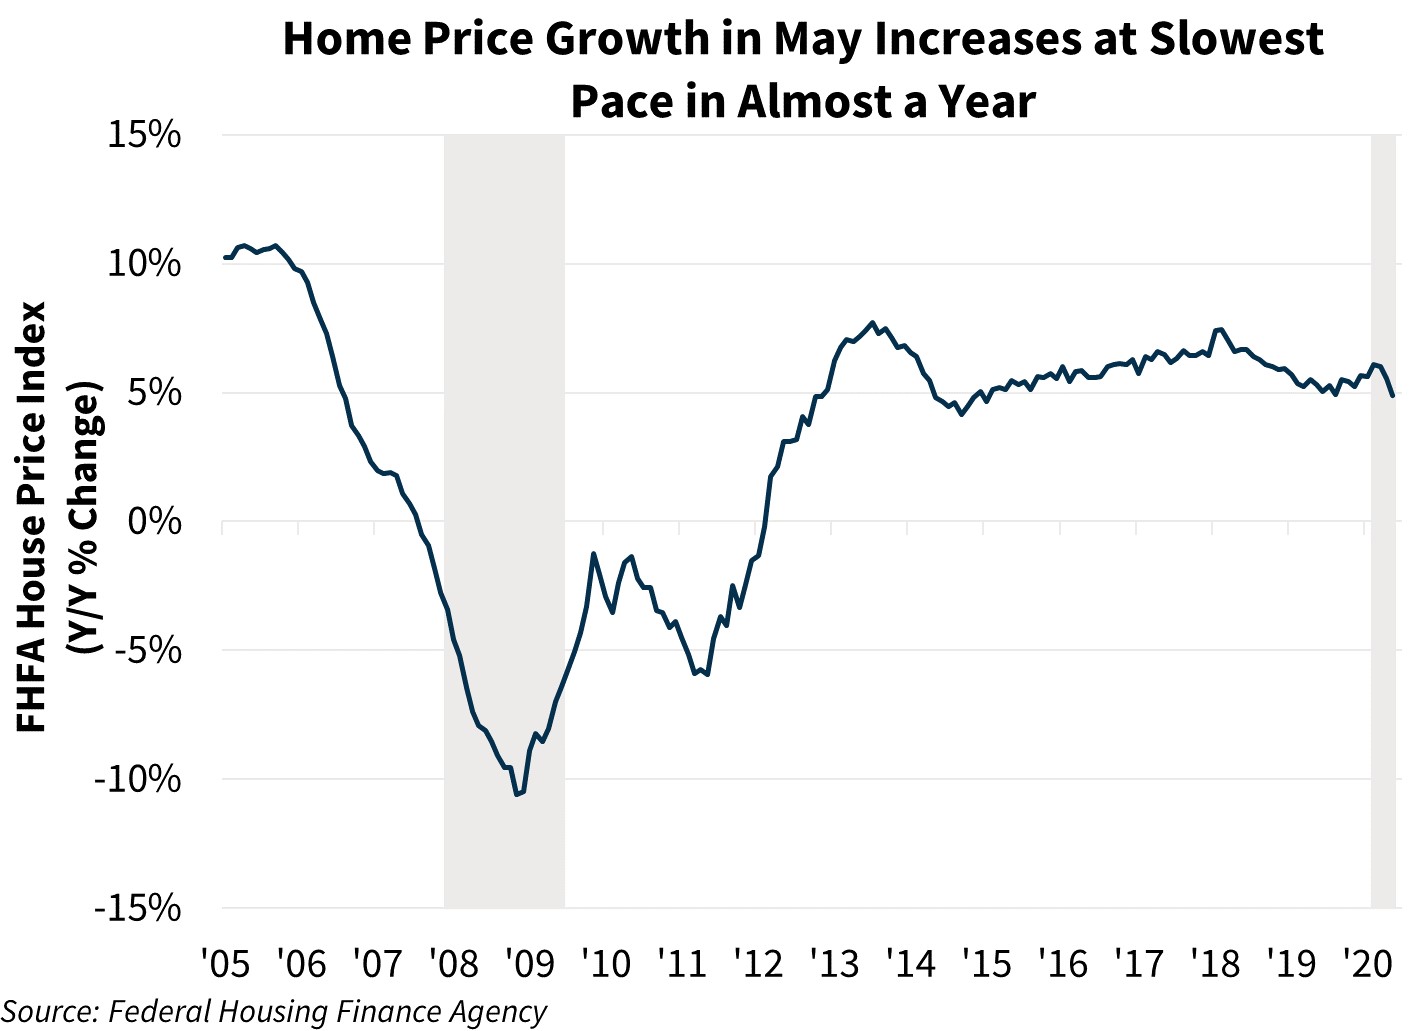 Home Price Growth in May Increases at Slowest Pace in Almost a Year 